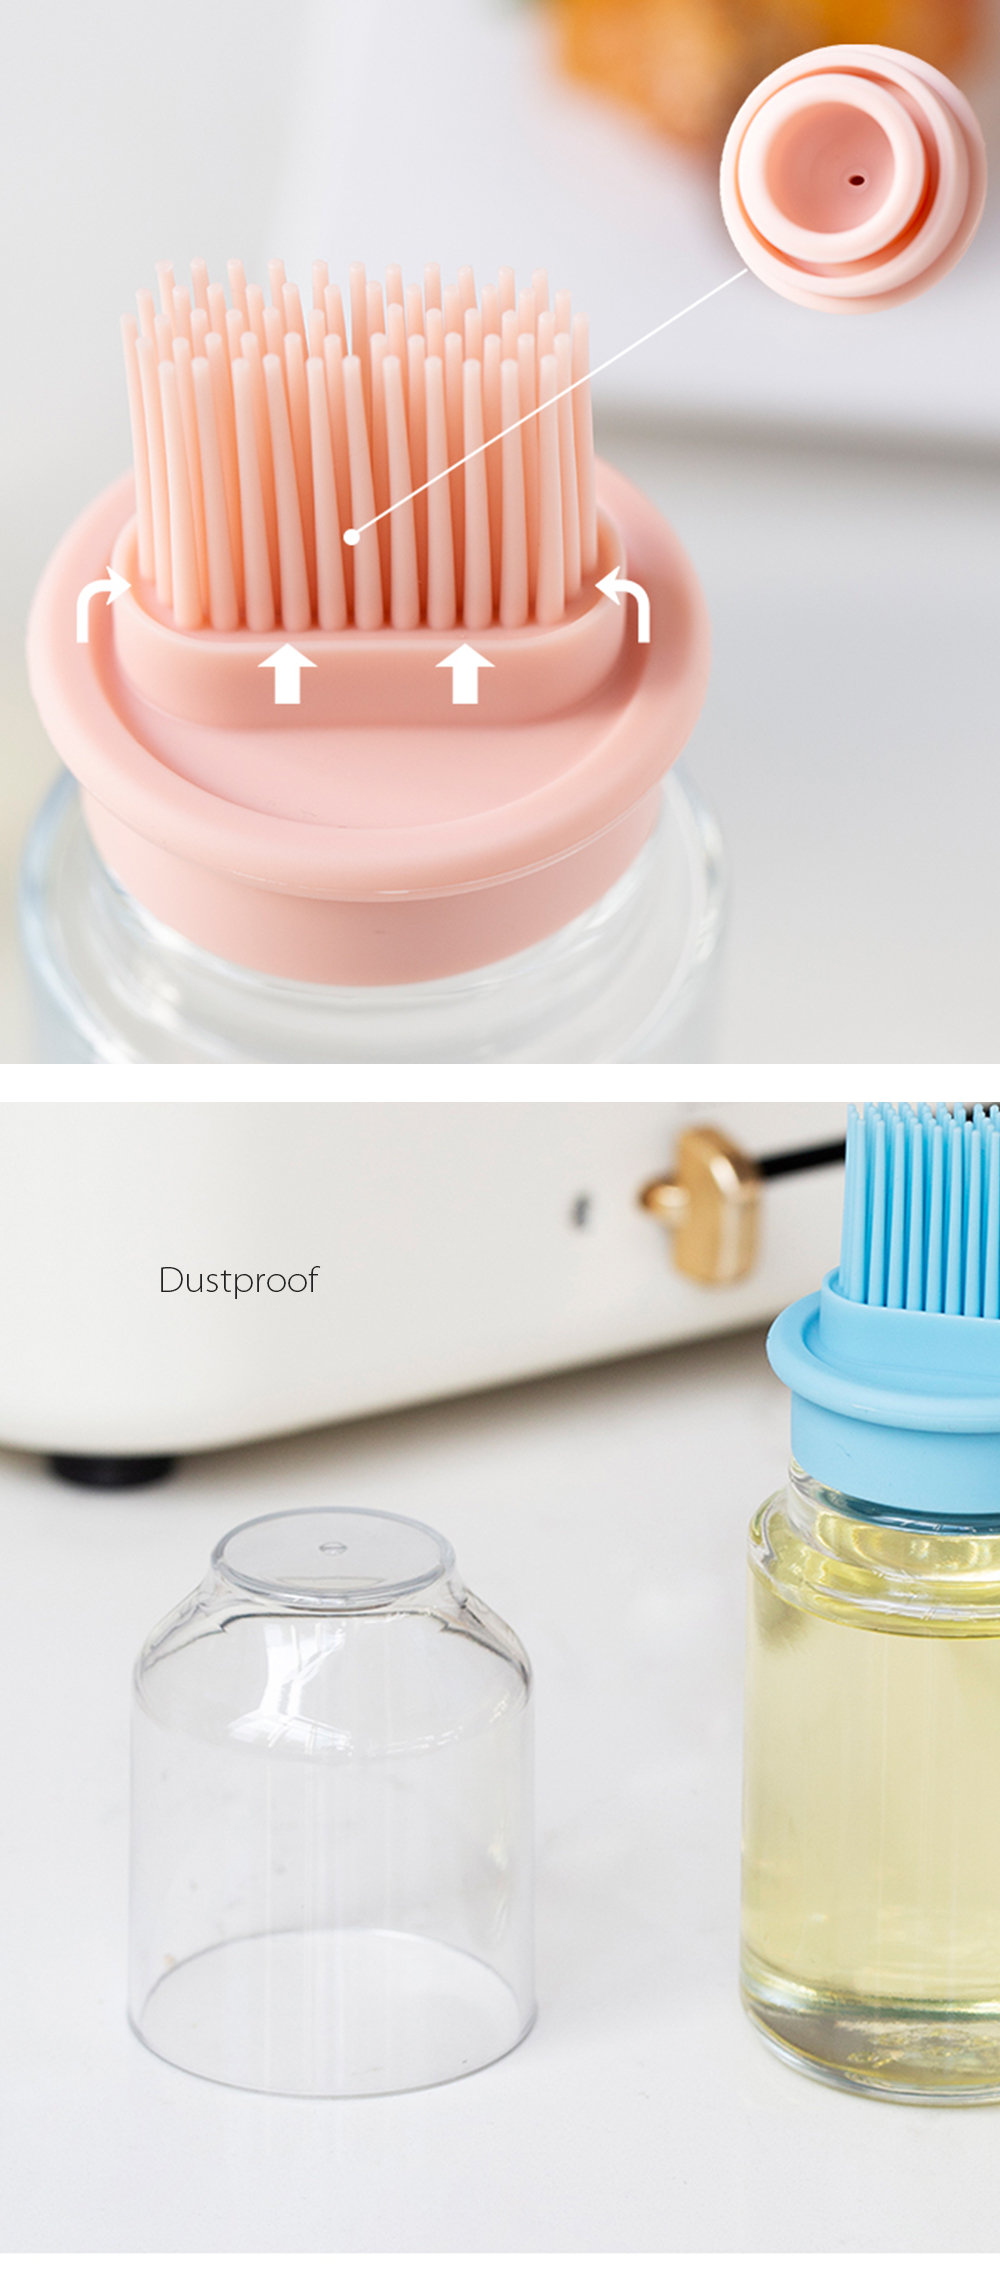 Hadanceo 200ML 2 in 1 Glass Oil Bottle with Silicone Brush Clear